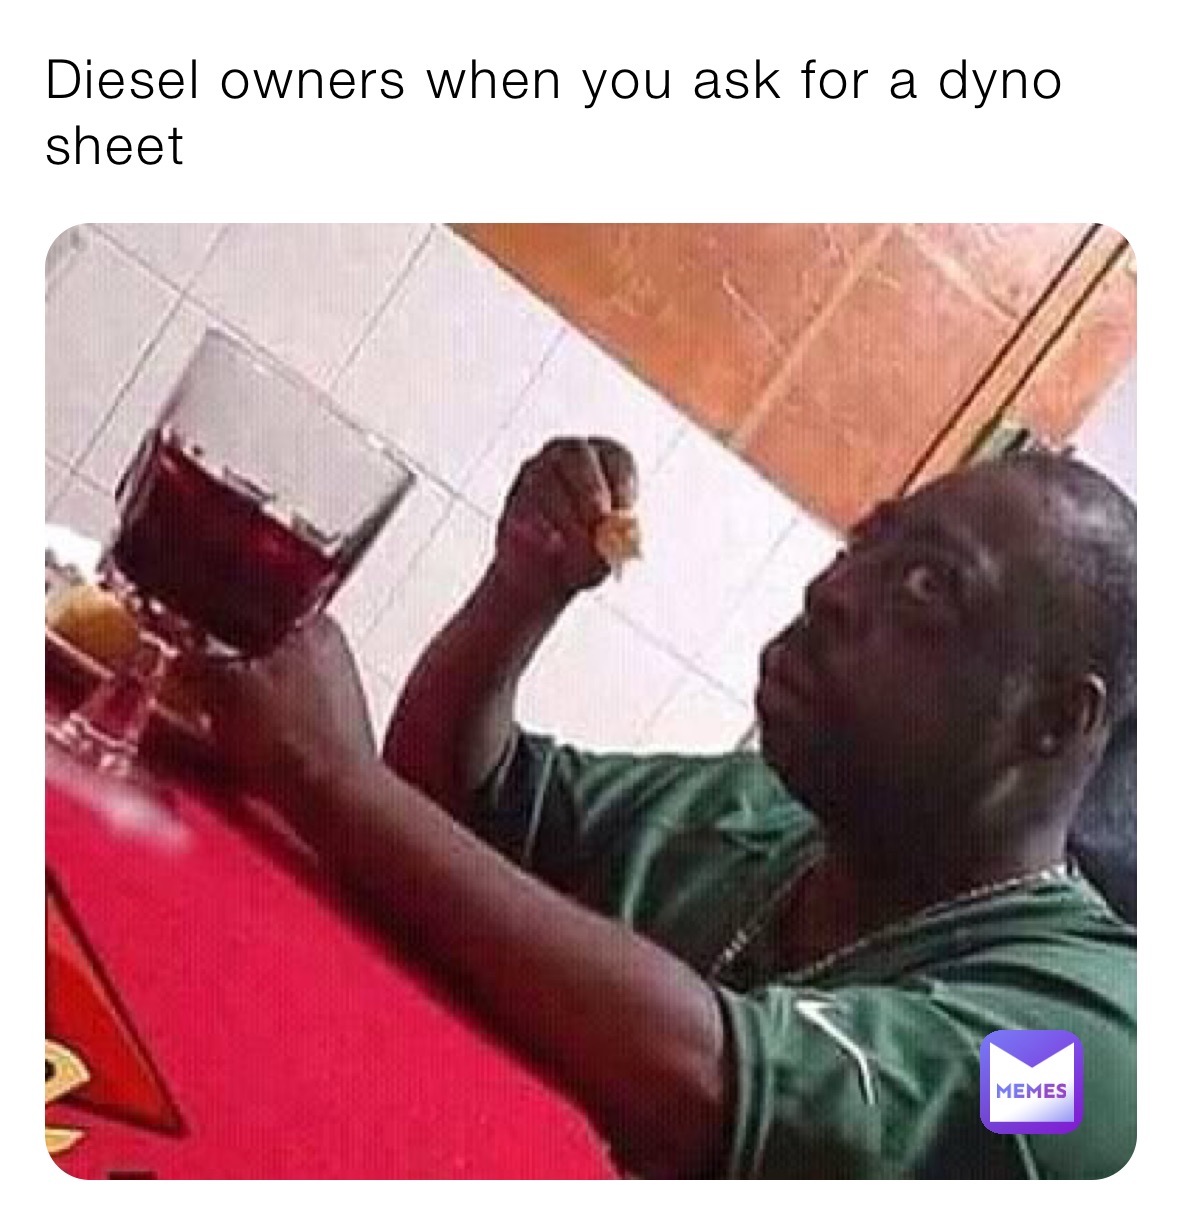 Diesel owners when you ask for a dyno sheet